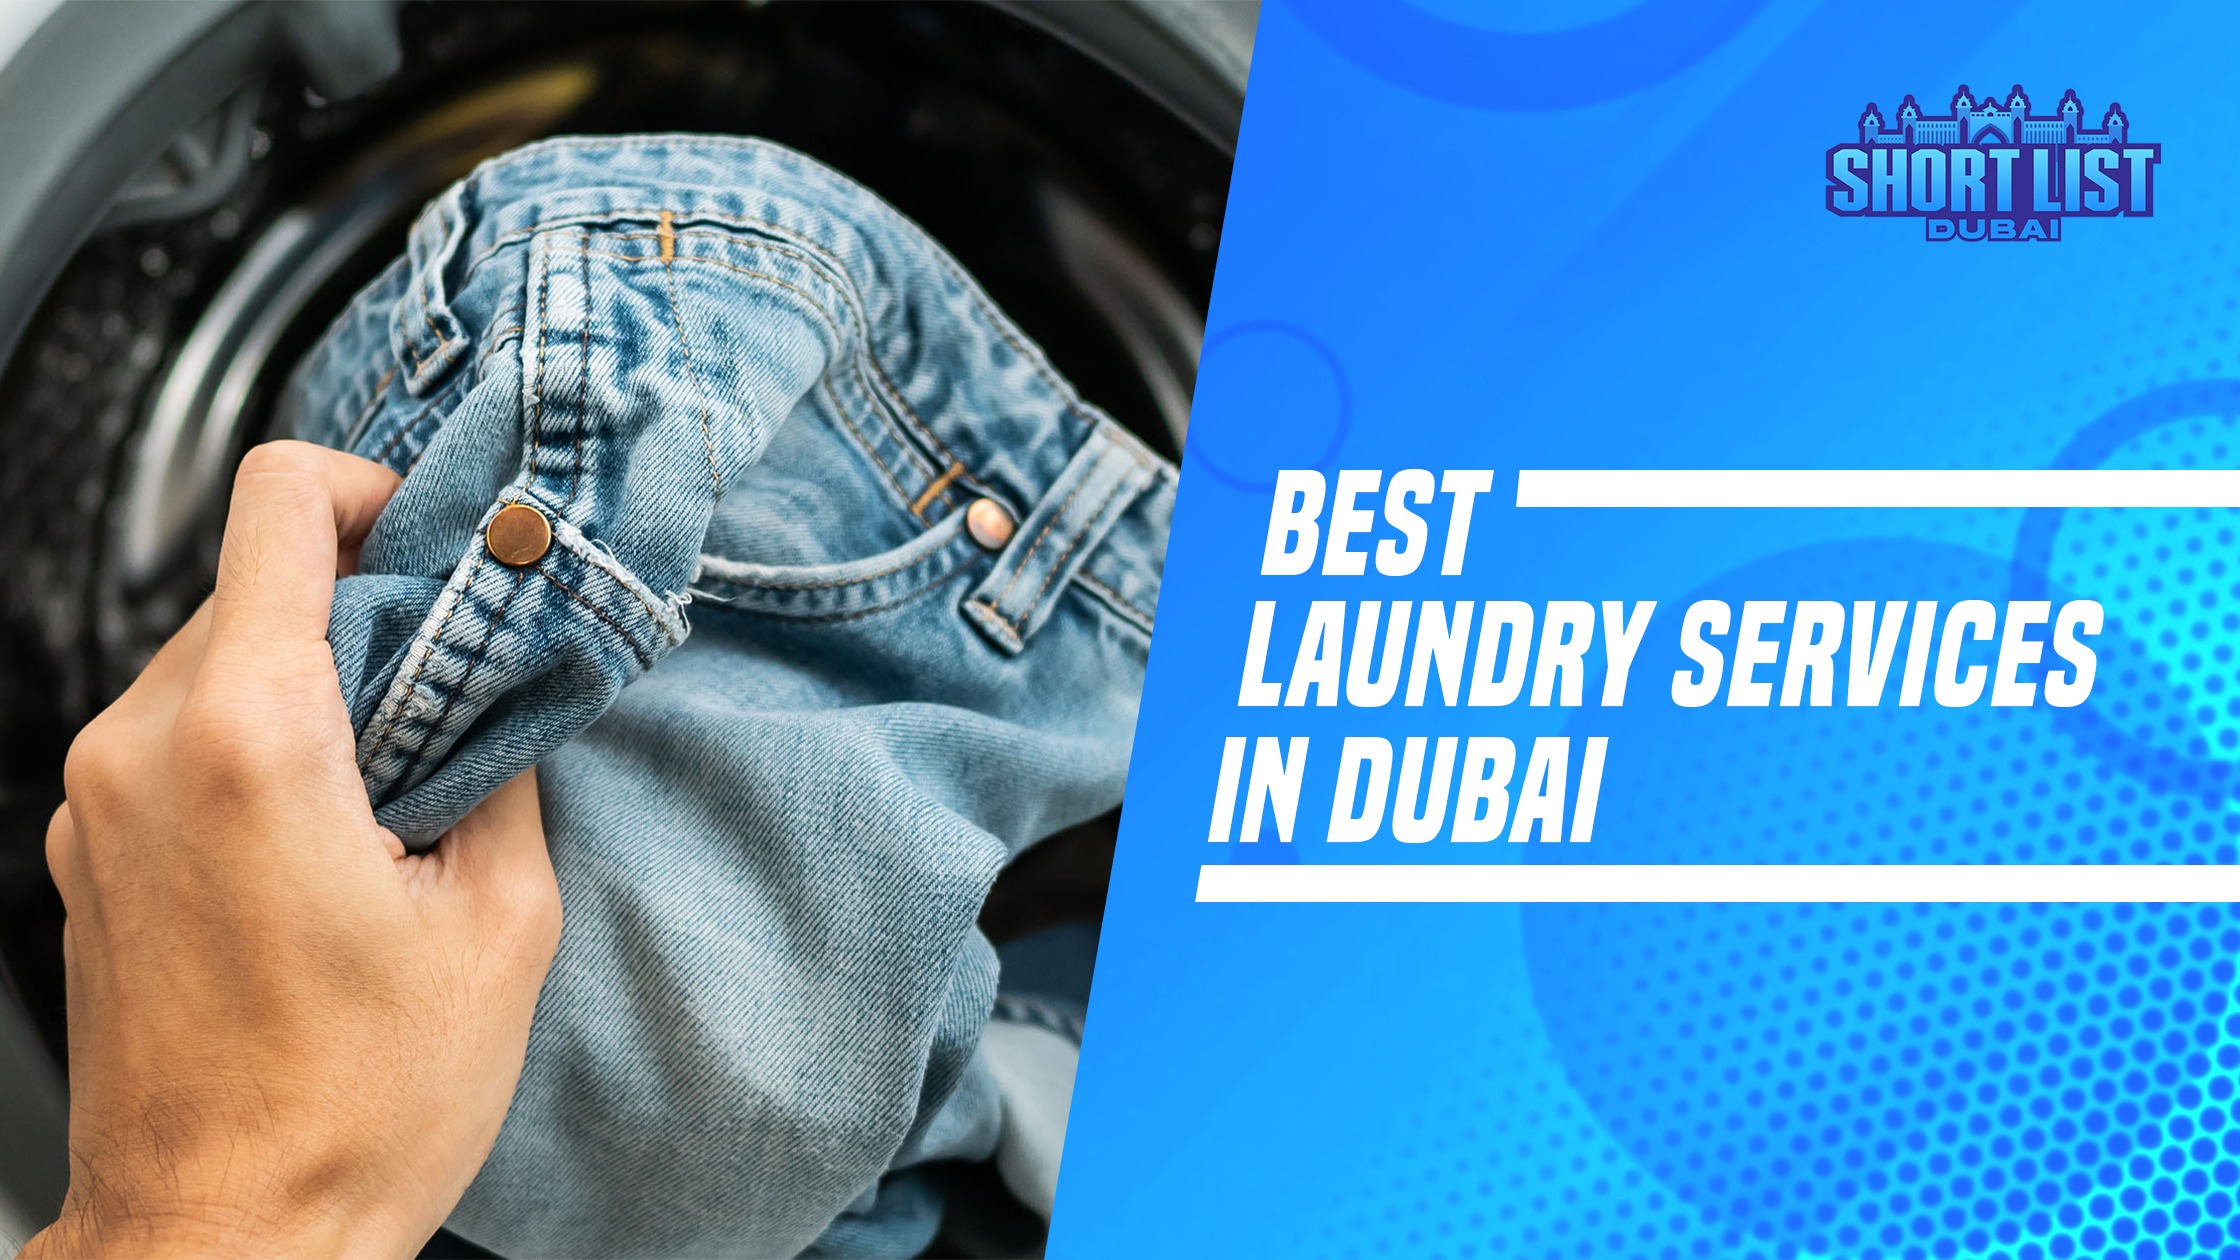 Uncover The 10 Best Laundry Services In Dubai For A Crisp And Clean Look